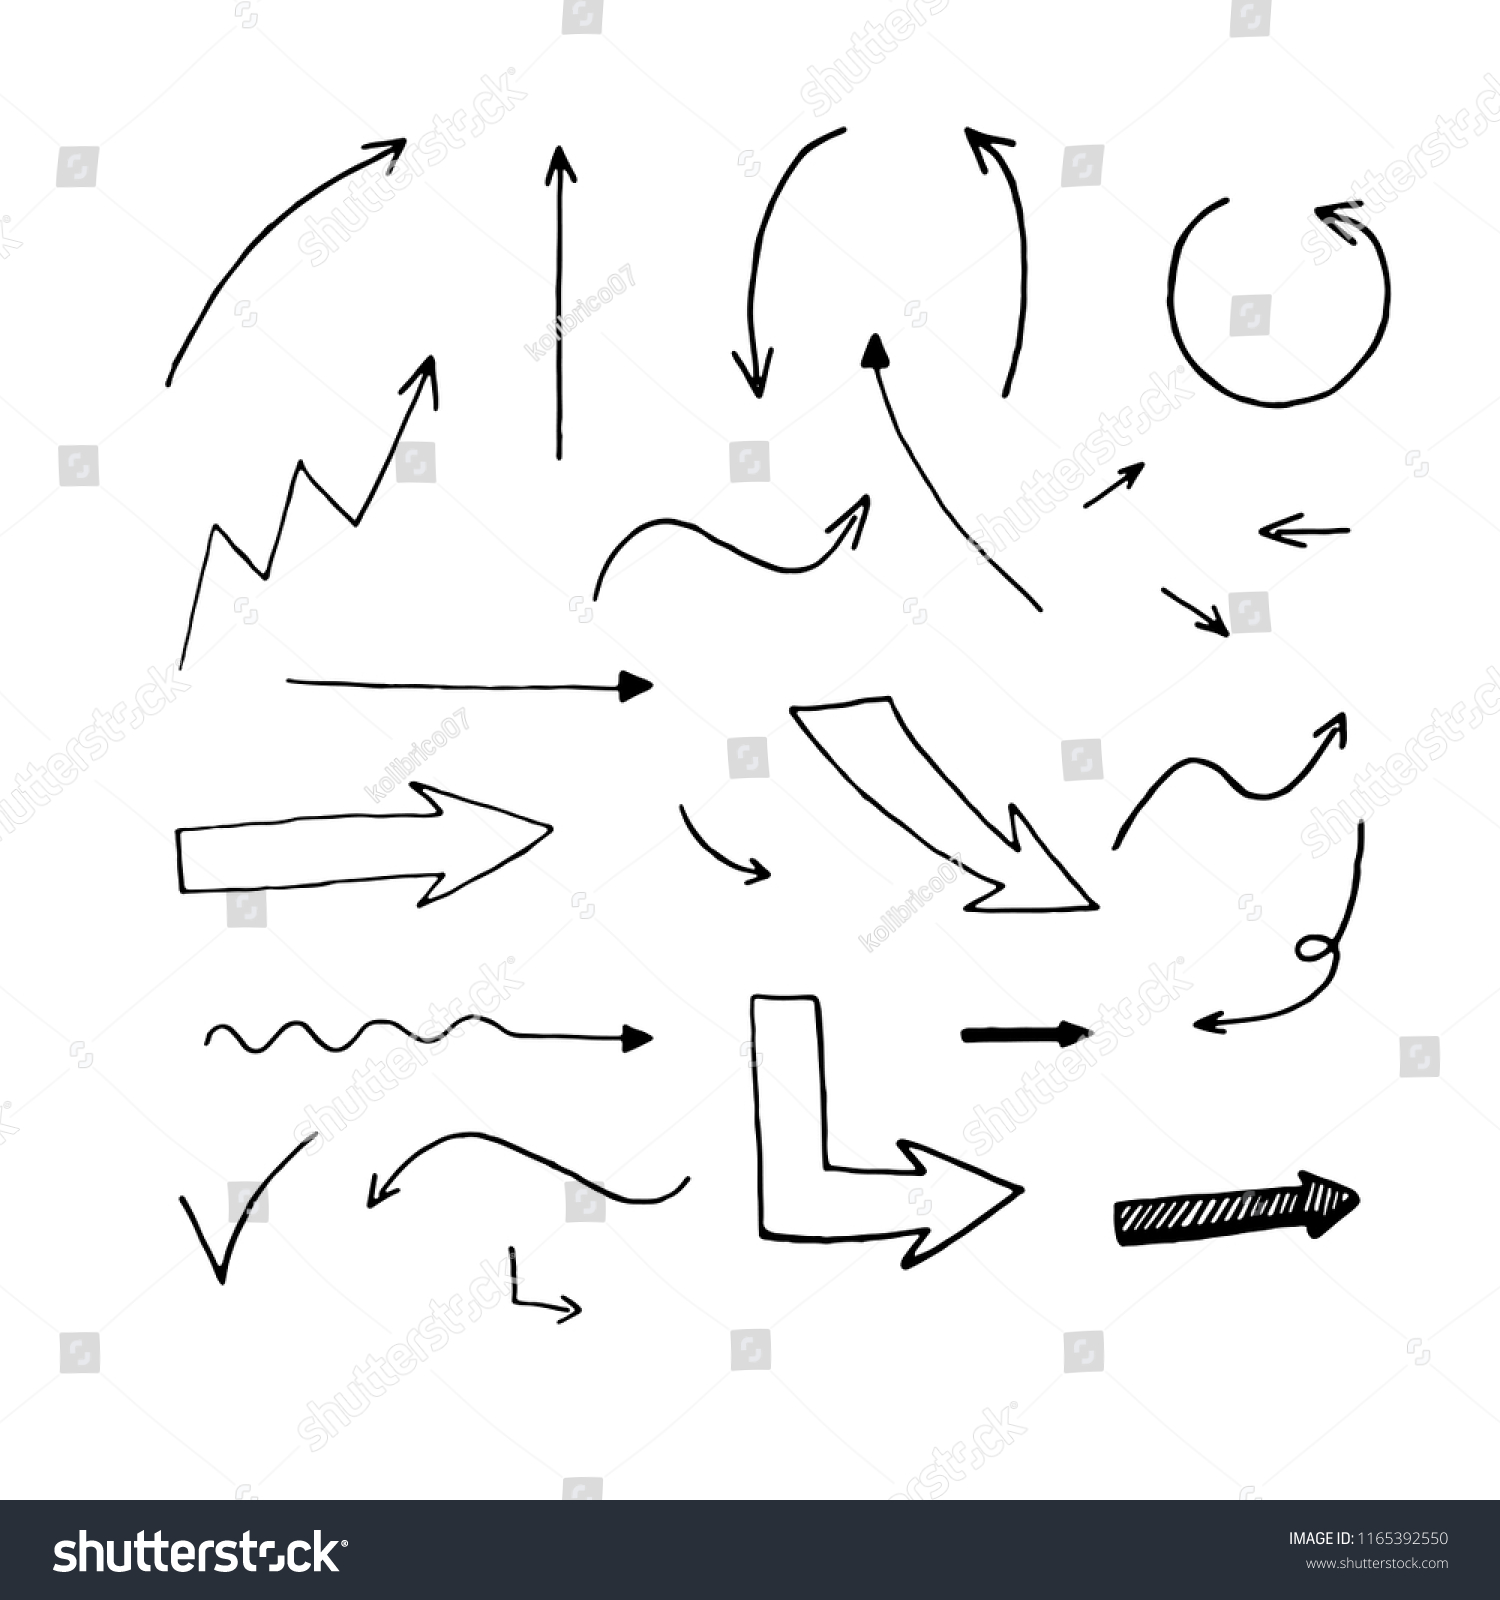 Vector set of hand drawn arrows. Different types of arrows. #1165392550